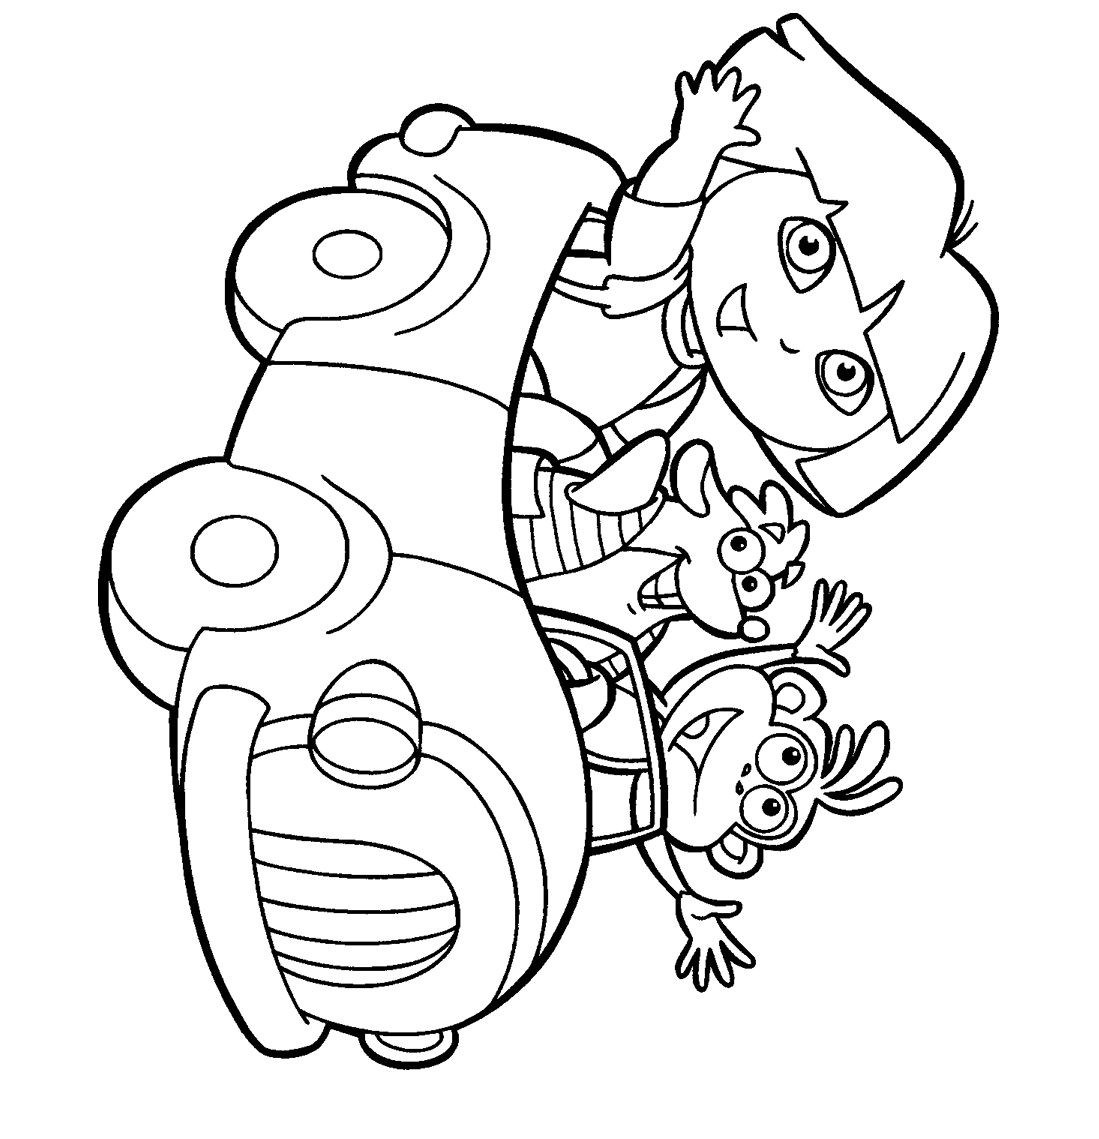 k coloring pages for kids - photo #16